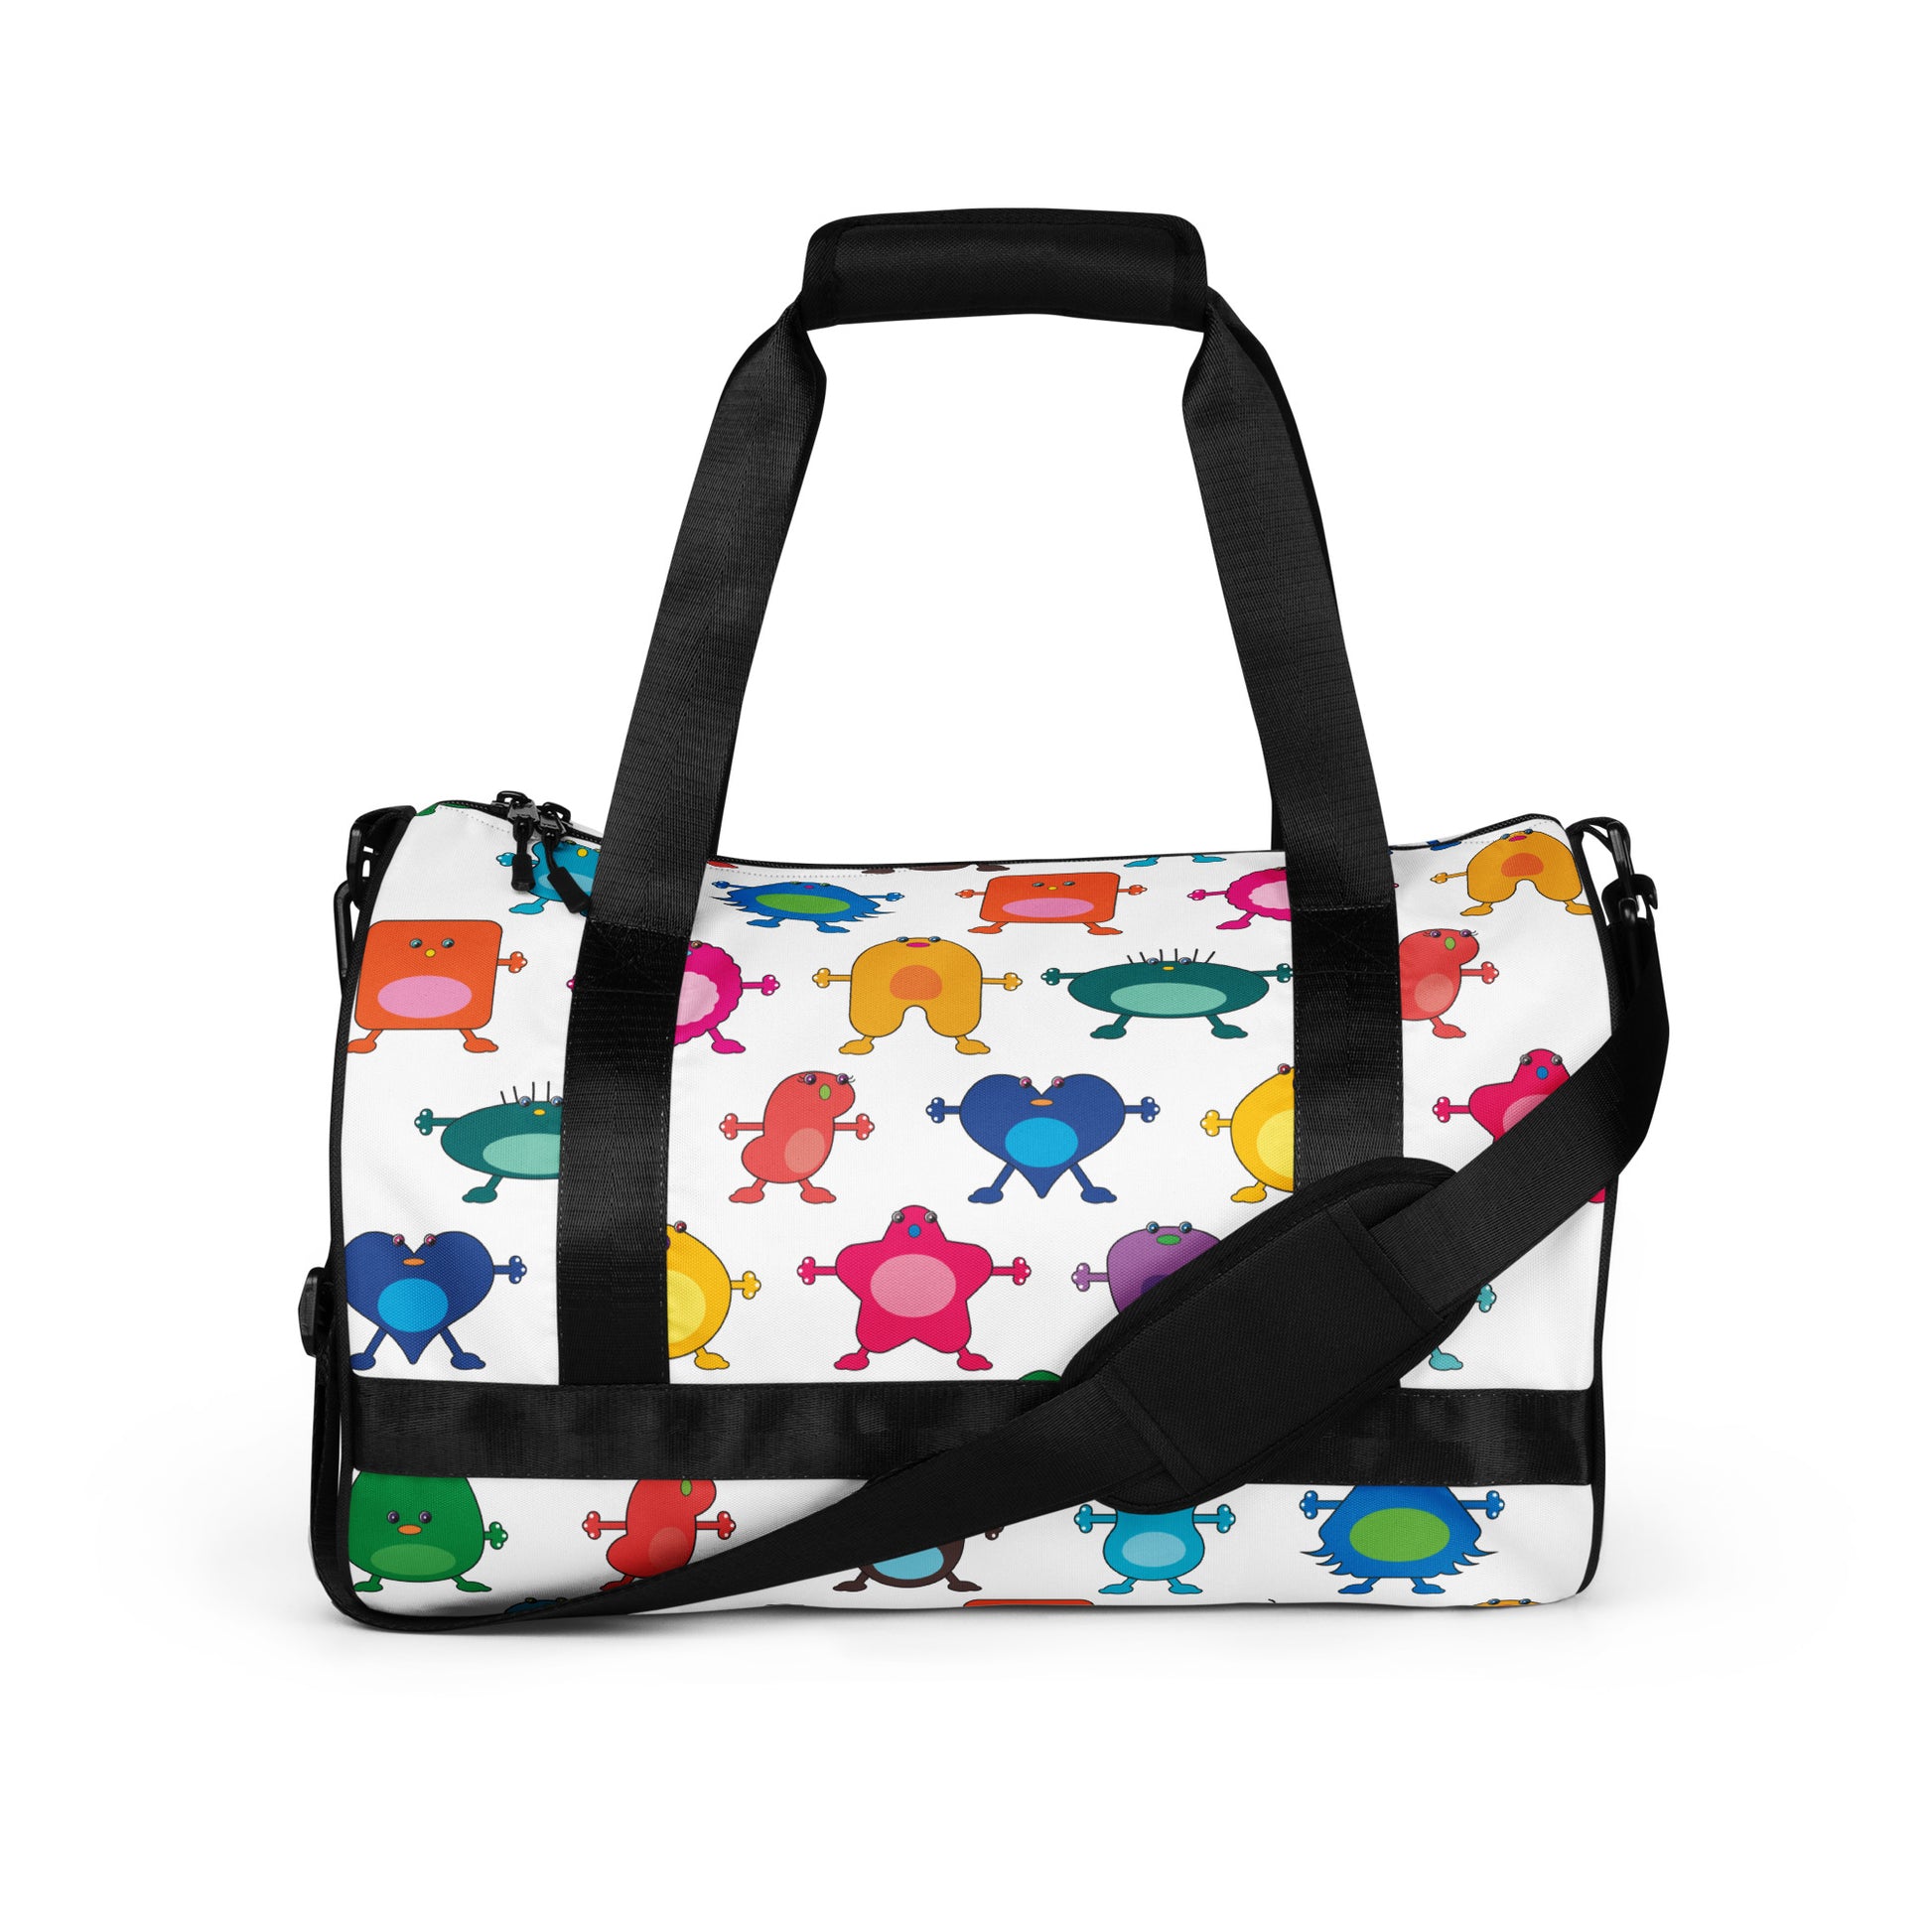 Kids cute colourful monster graphic print on white gym bag black handles